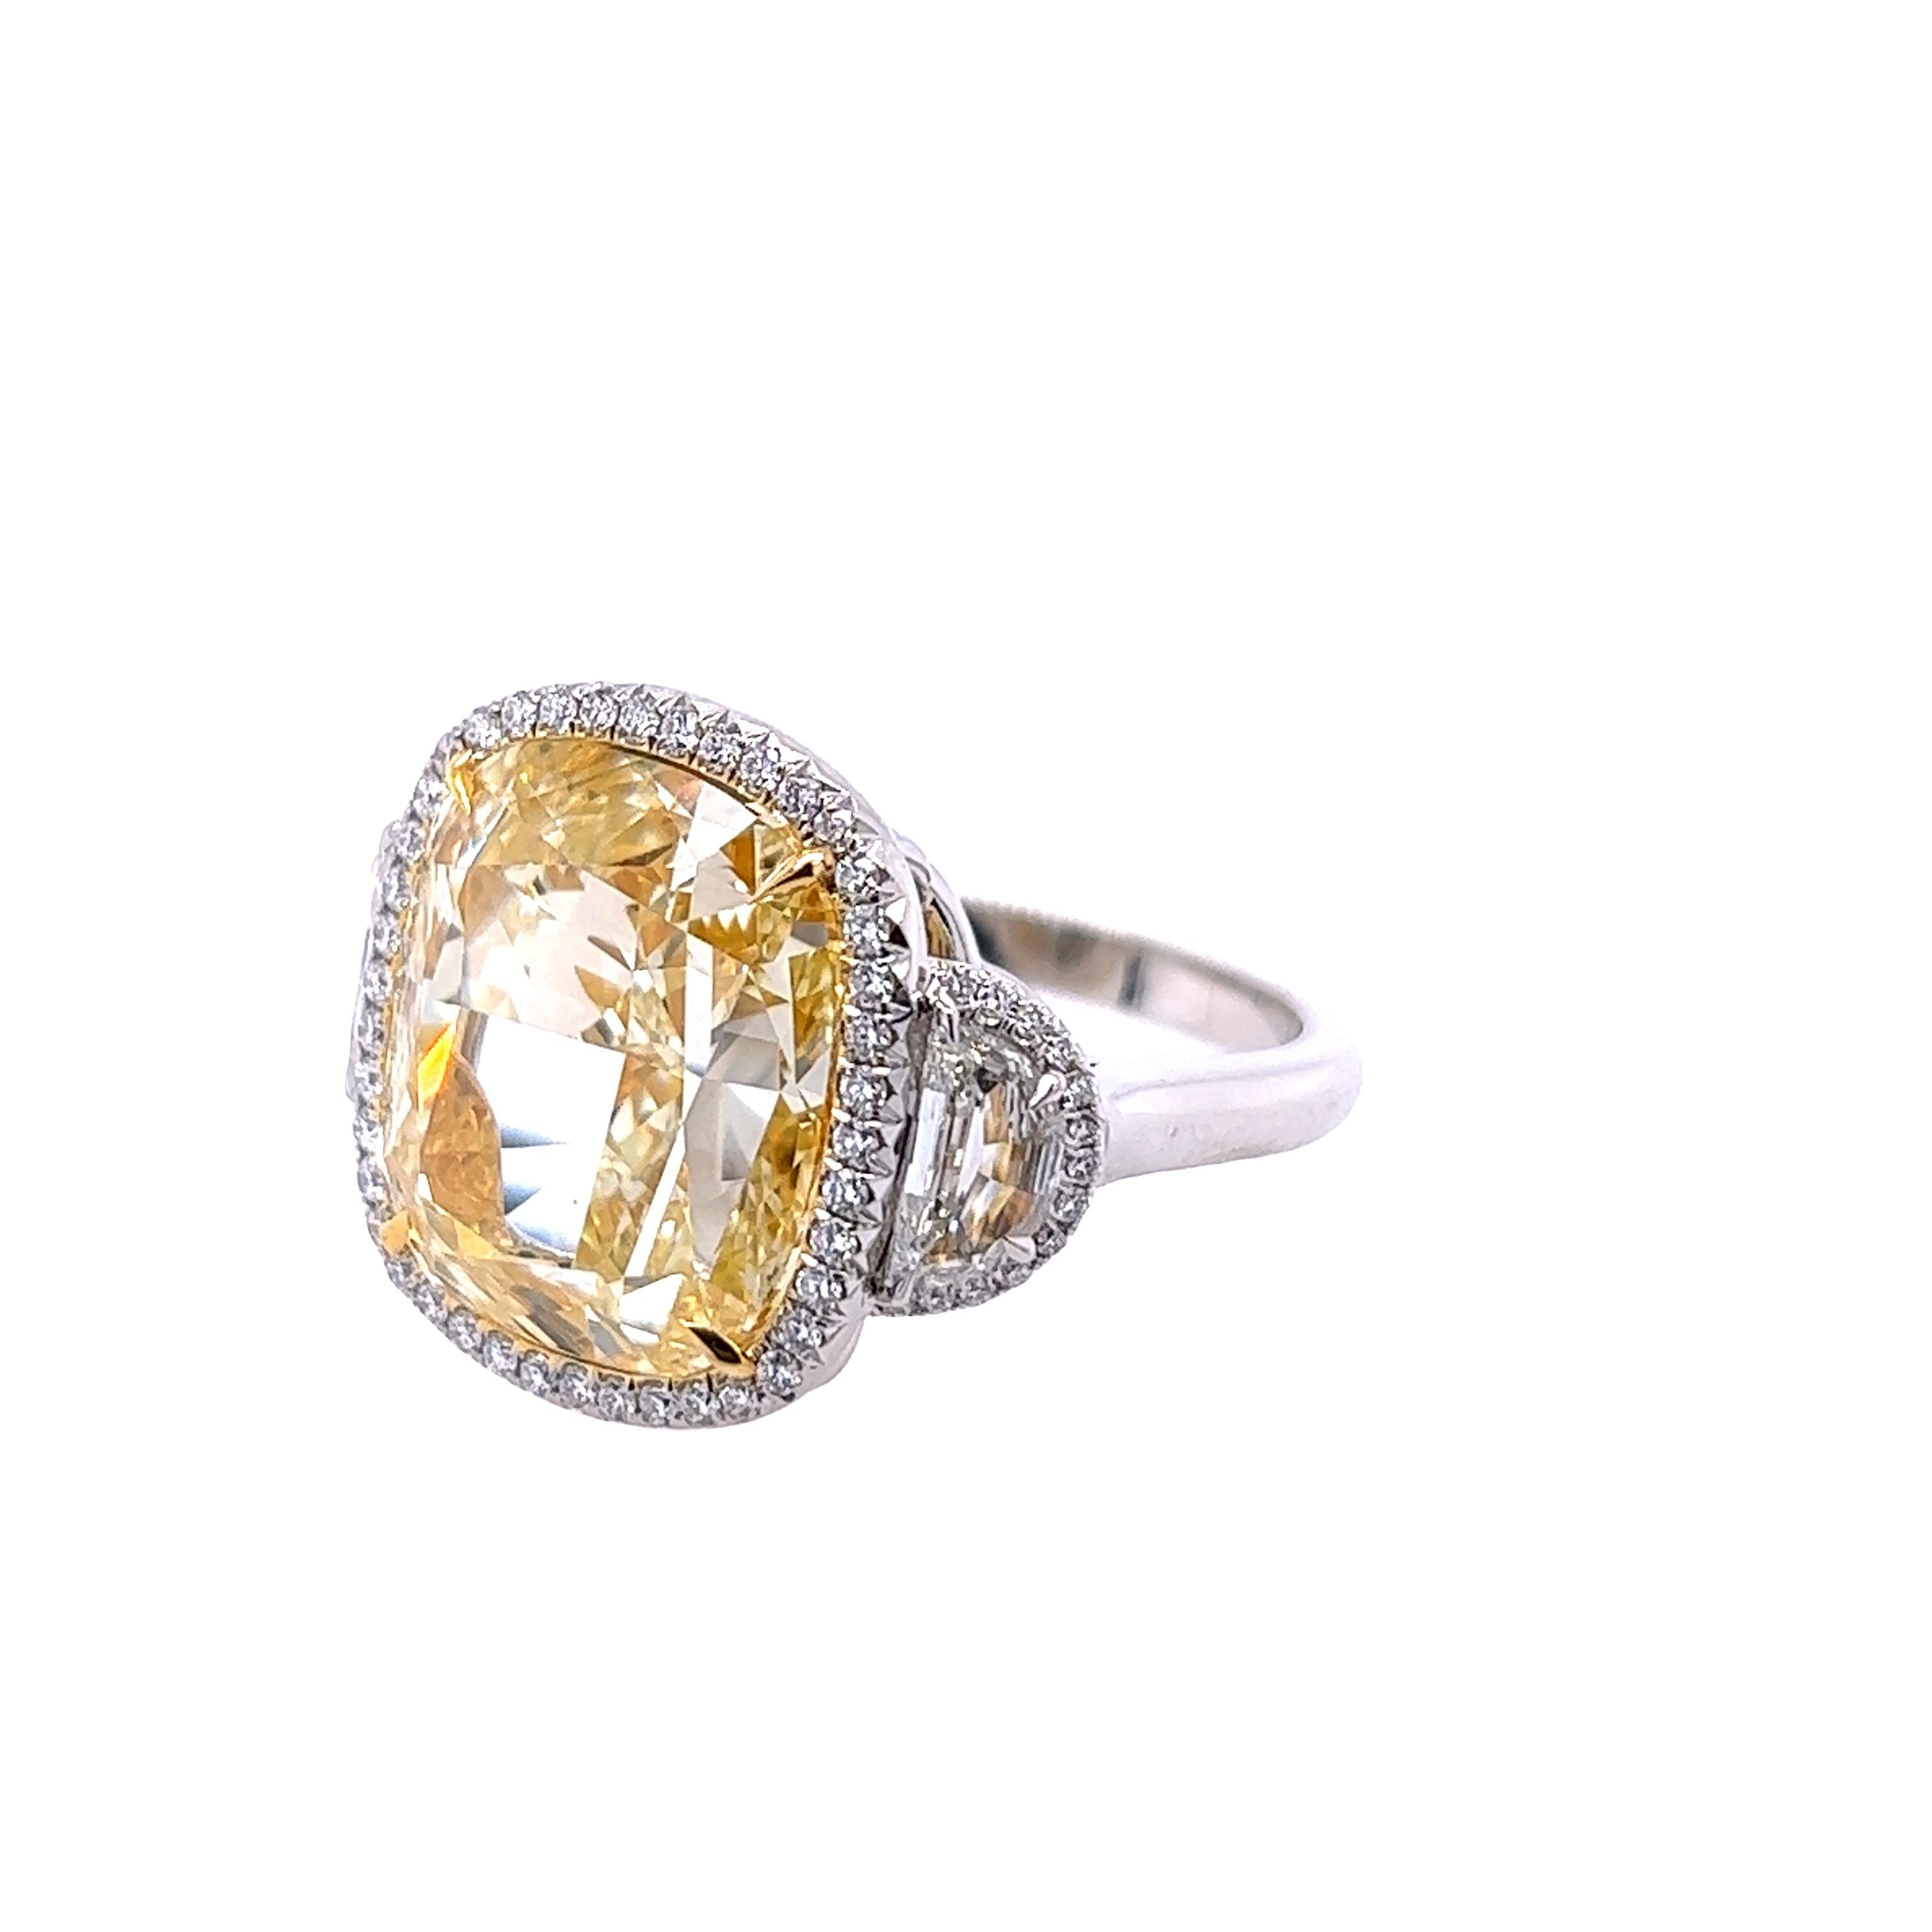 David Rosenberg 16.06 Carat Cushion Cut Fancy Yellow GIA Diamond Engagement Ring In New Condition For Sale In Boca Raton, FL